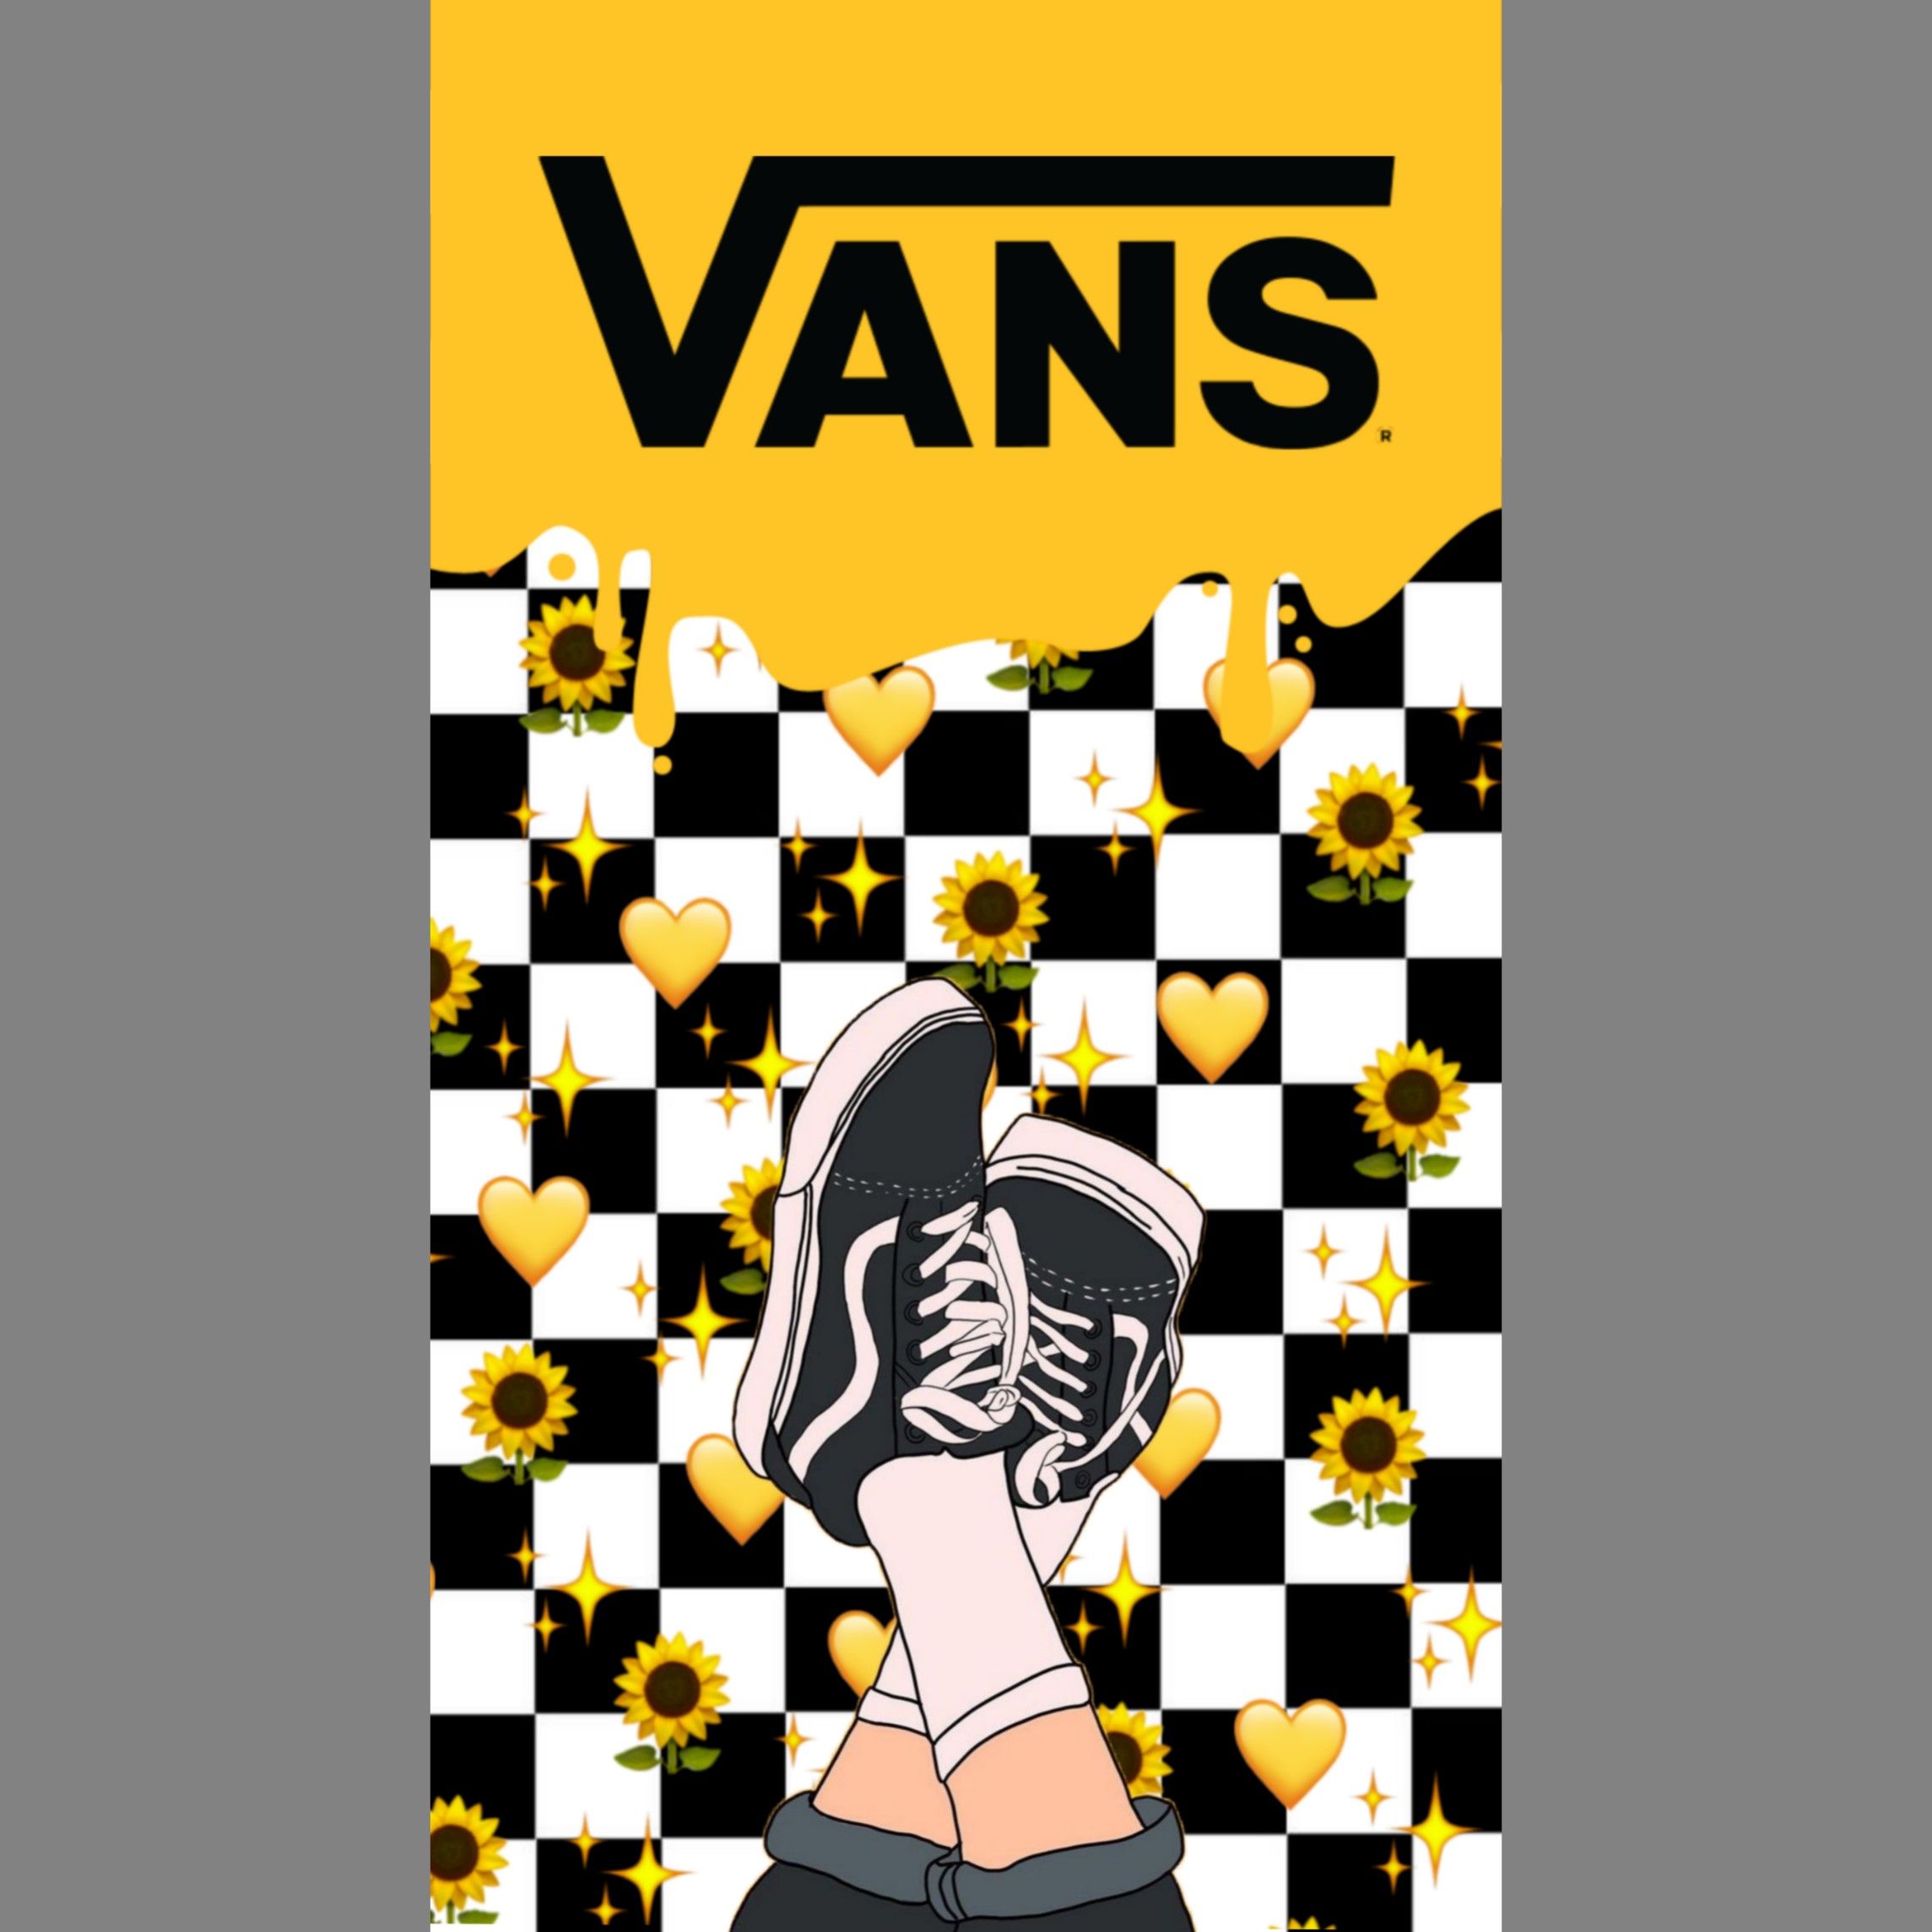 A yellow and black checkered background with vans shoes - Vans